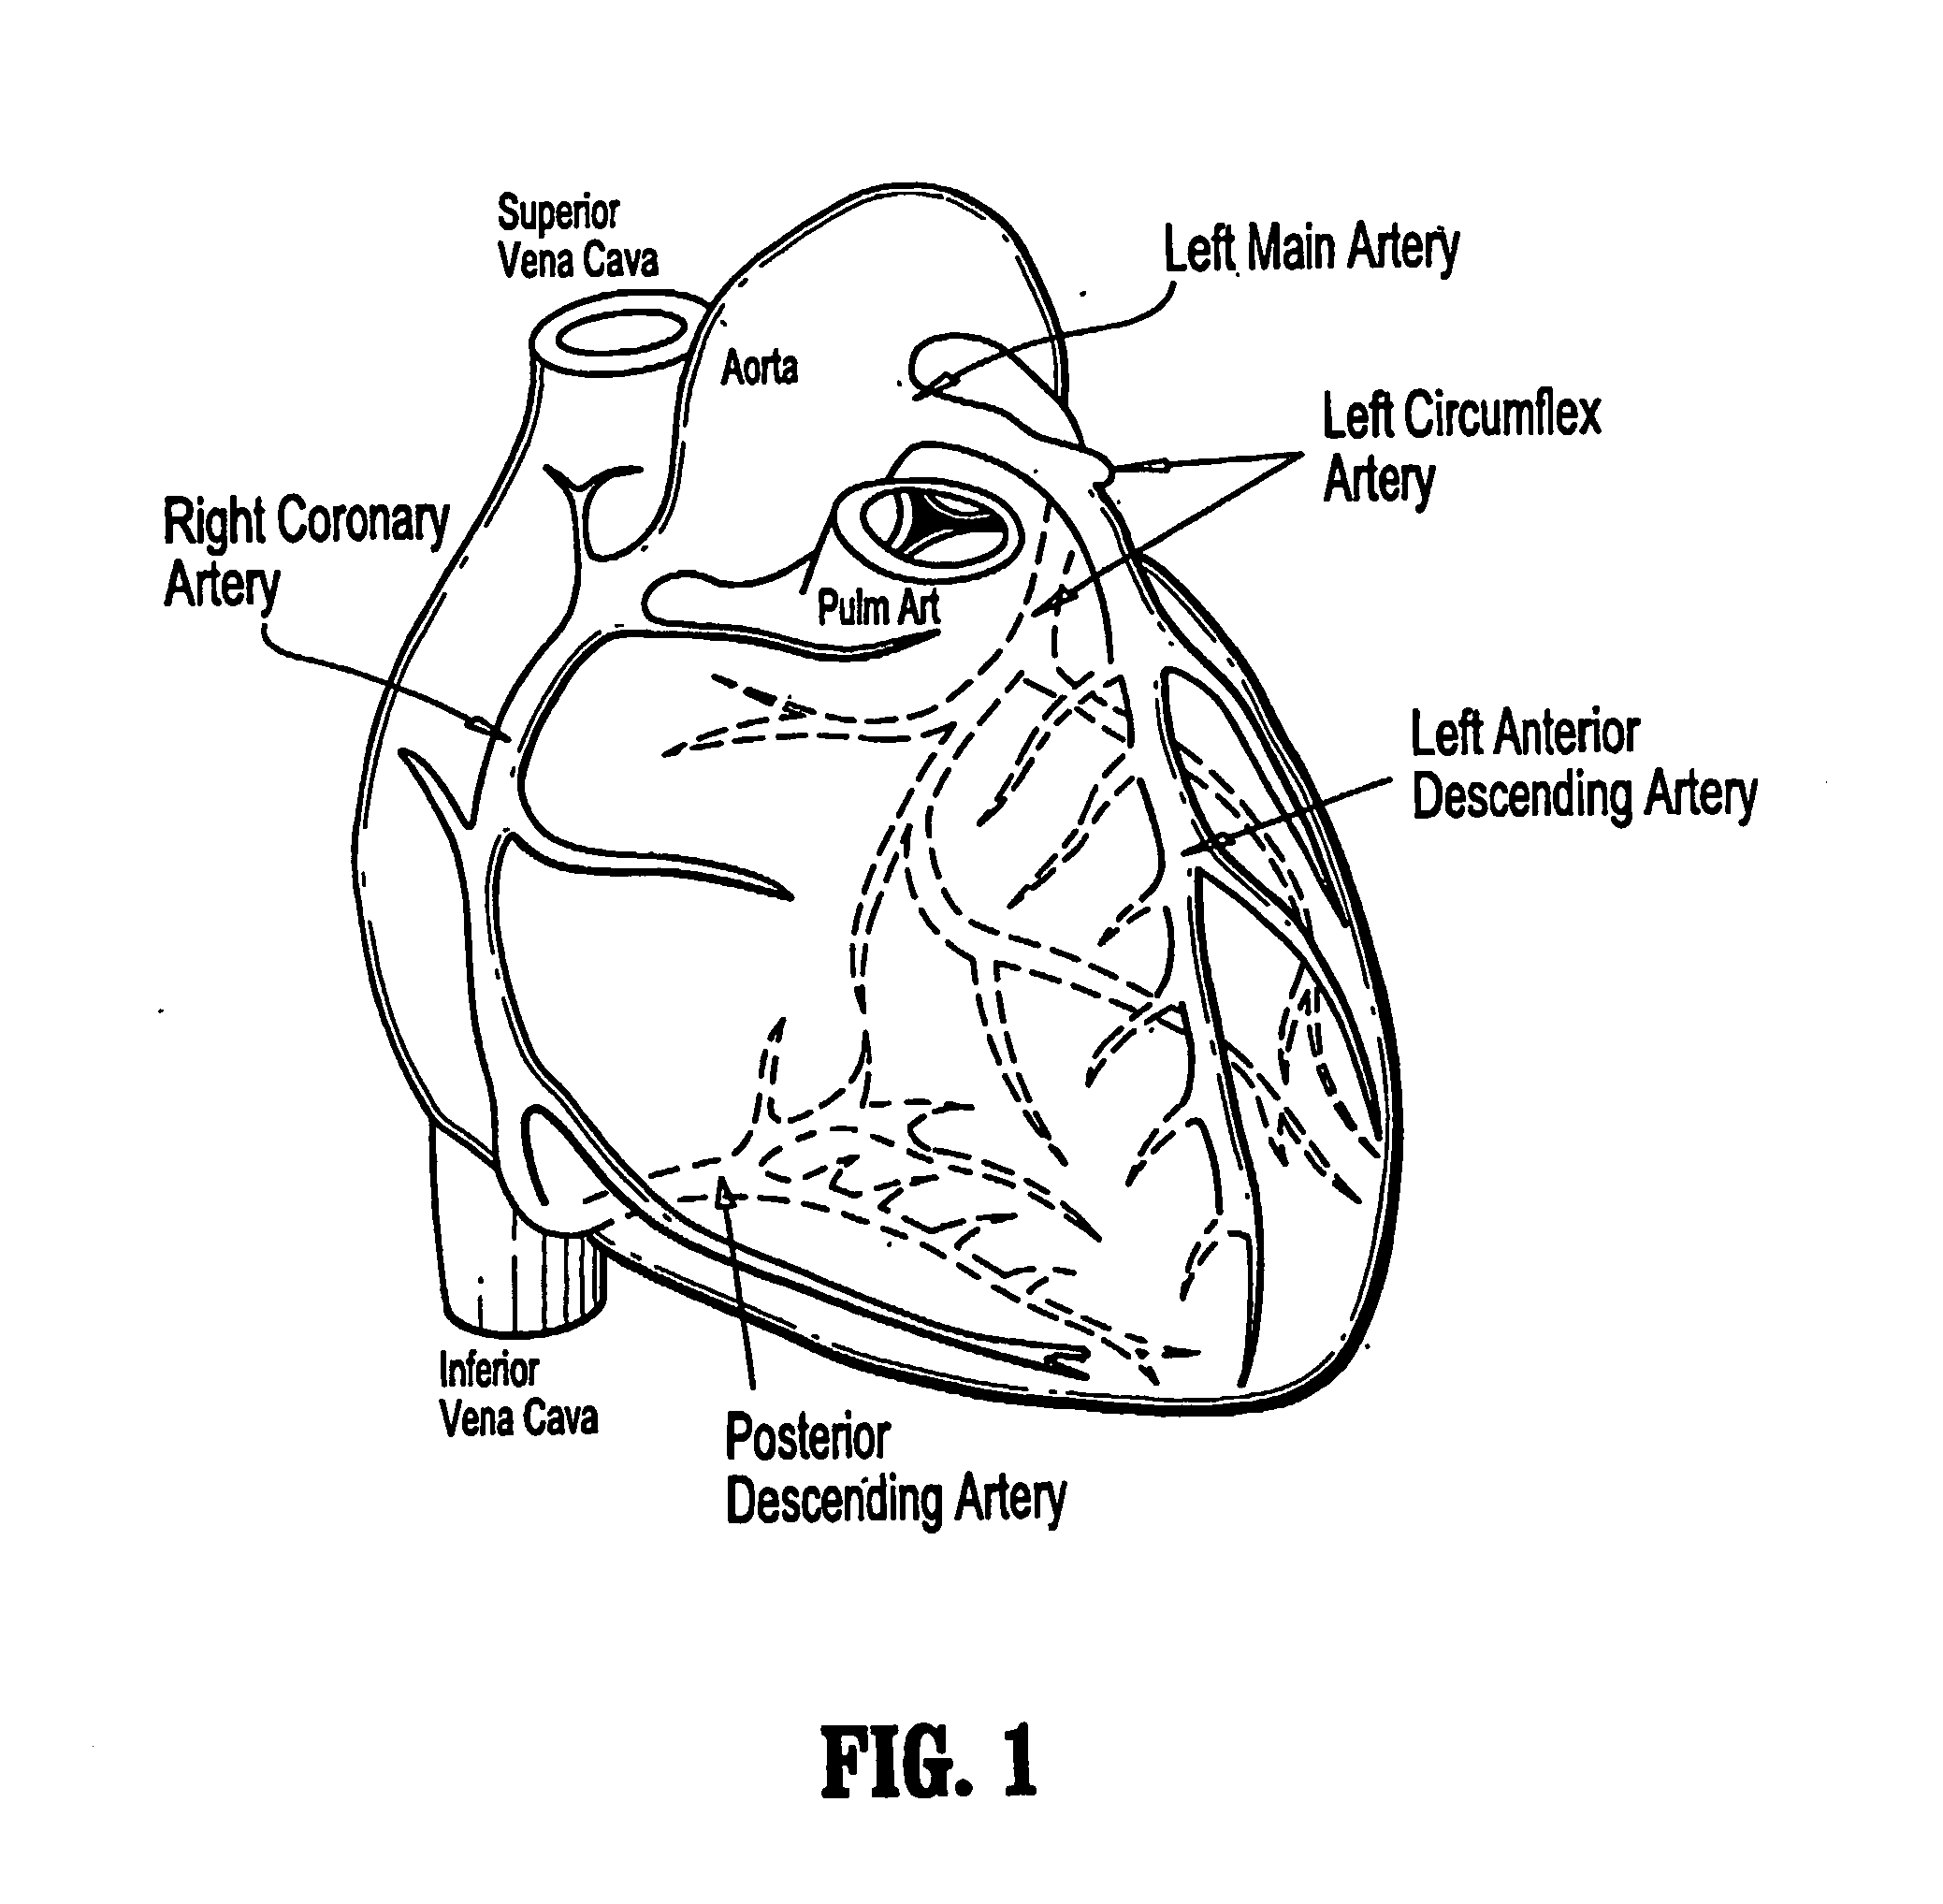 Imaging system and methods for cardiac analysis